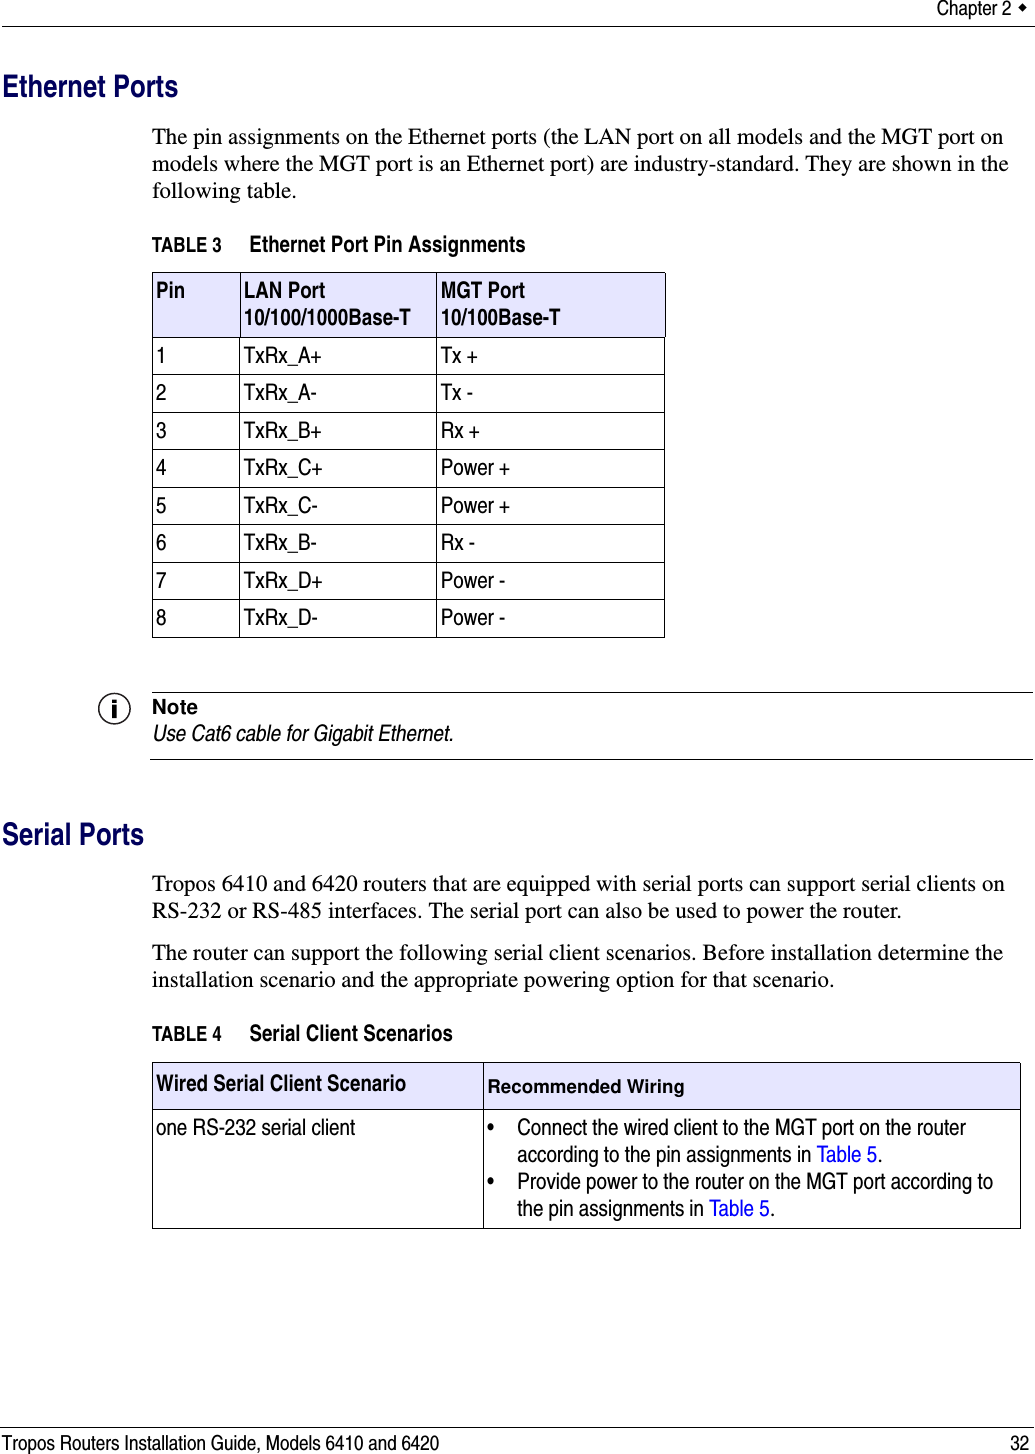 Chapter 2  Tropos Routers Installation Guide, Models 6410 and 6420 32Ethernet PortsThe pin assignments on the Ethernet ports (the LAN port on all models and the MGT port on models where the MGT port is an Ethernet port) are industry-standard. They are shown in the following table.NoteUse Cat6 cable for Gigabit Ethernet.Serial PortsTropos 6410 and 6420 routers that are equipped with serial ports can support serial clients on RS-232 or RS-485 interfaces. The serial port can also be used to power the router. The router can support the following serial client scenarios. Before installation determine the installation scenario and the appropriate powering option for that scenario.TABLE 3 Ethernet Port Pin AssignmentsPin LAN Port10/100/1000Base-TMGT Port10/100Base-T1 TxRx_A+ Tx +2 TxRx_A- Tx -3 TxRx_B+ Rx +4 TxRx_C+ Power +5 TxRx_C- Power +6 TxRx_B- Rx - 7 TxRx_D+ Power -8 TxRx_D- Power -TABLE 4 Serial Client ScenariosWired Serial Client Scenario Recommended Wiringone RS-232 serial client • Connect the wired client to the MGT port on the router according to the pin assignments in Table 5.• Provide power to the router on the MGT port according to the pin assignments in Table 5.